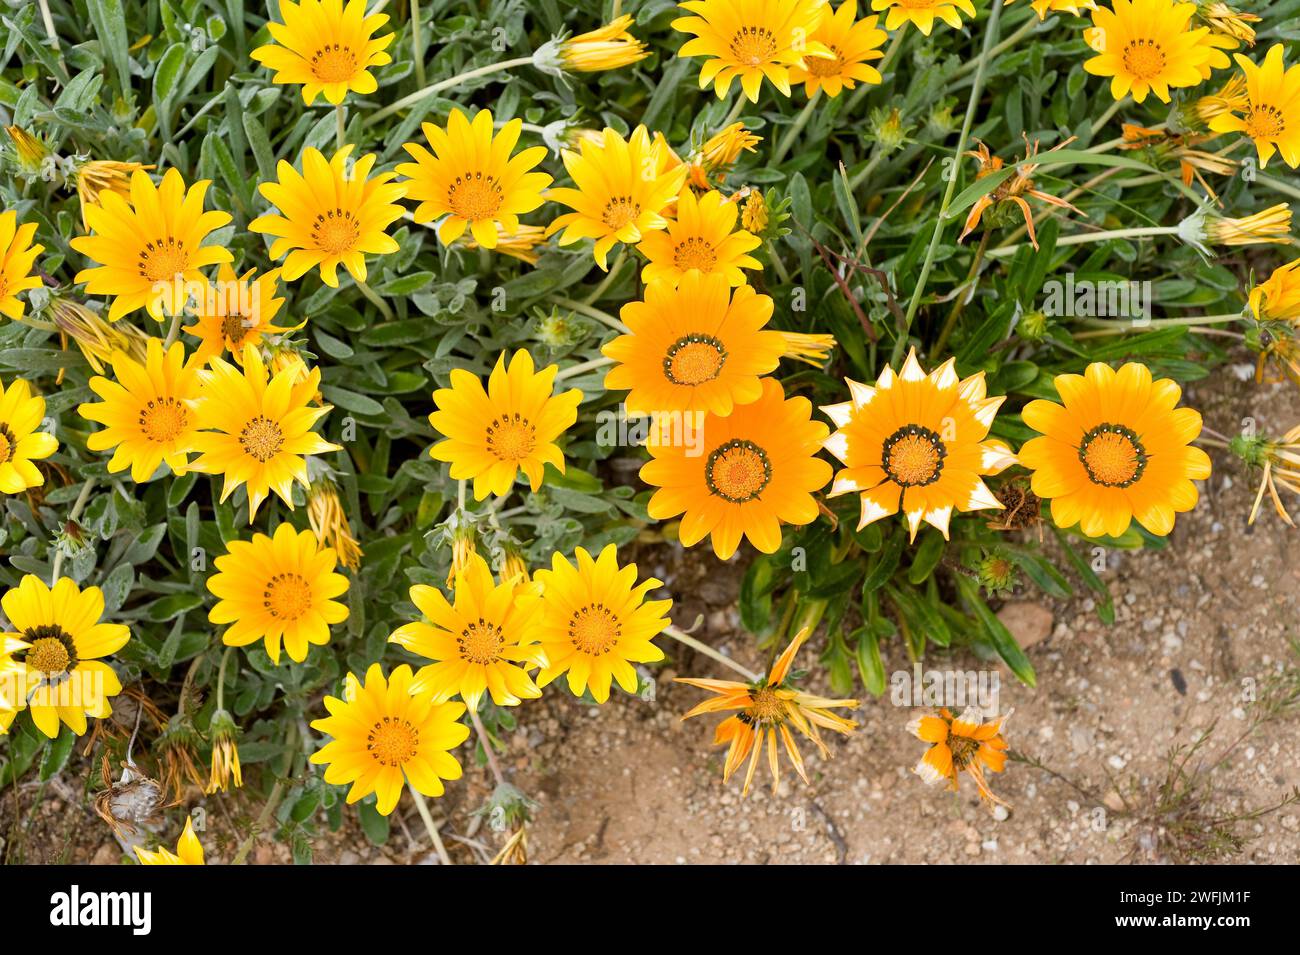 Treasure flower (Gazania linearis or Gazania longiscapa) is a perennial herb native to southern Africa. Chapters detail. Stock Photo